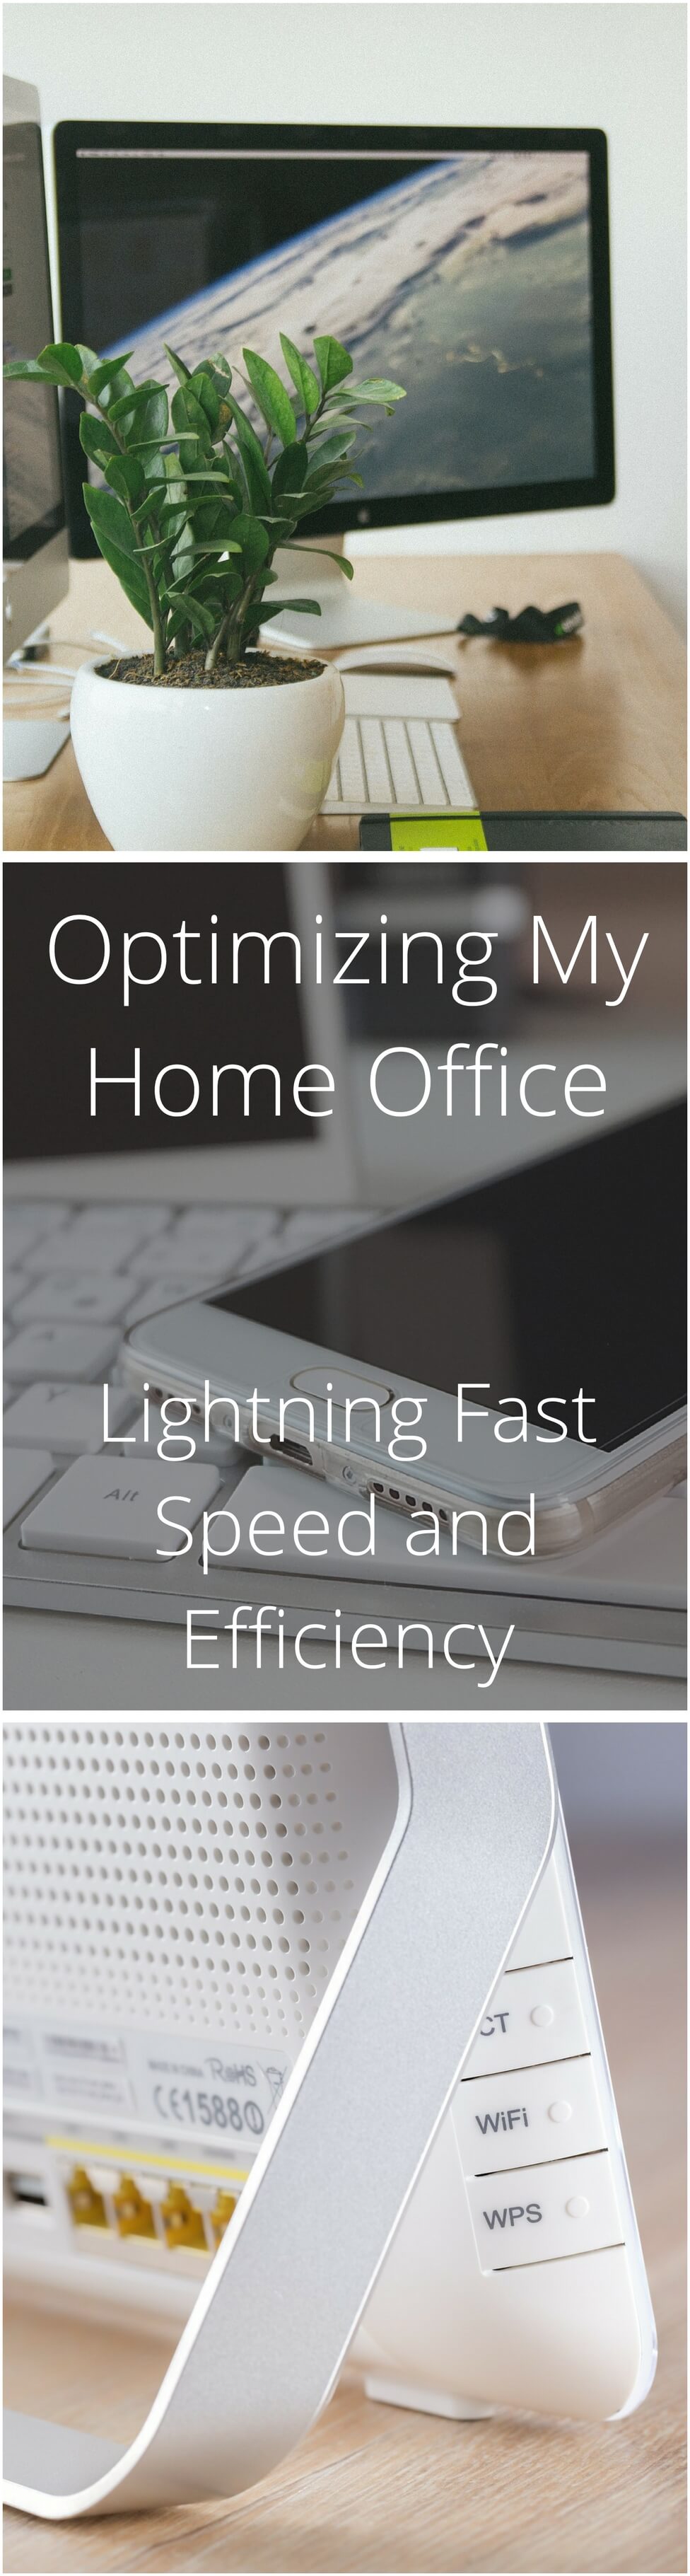 Optimizing my home office for lightning fast speed and efficiency pinterest